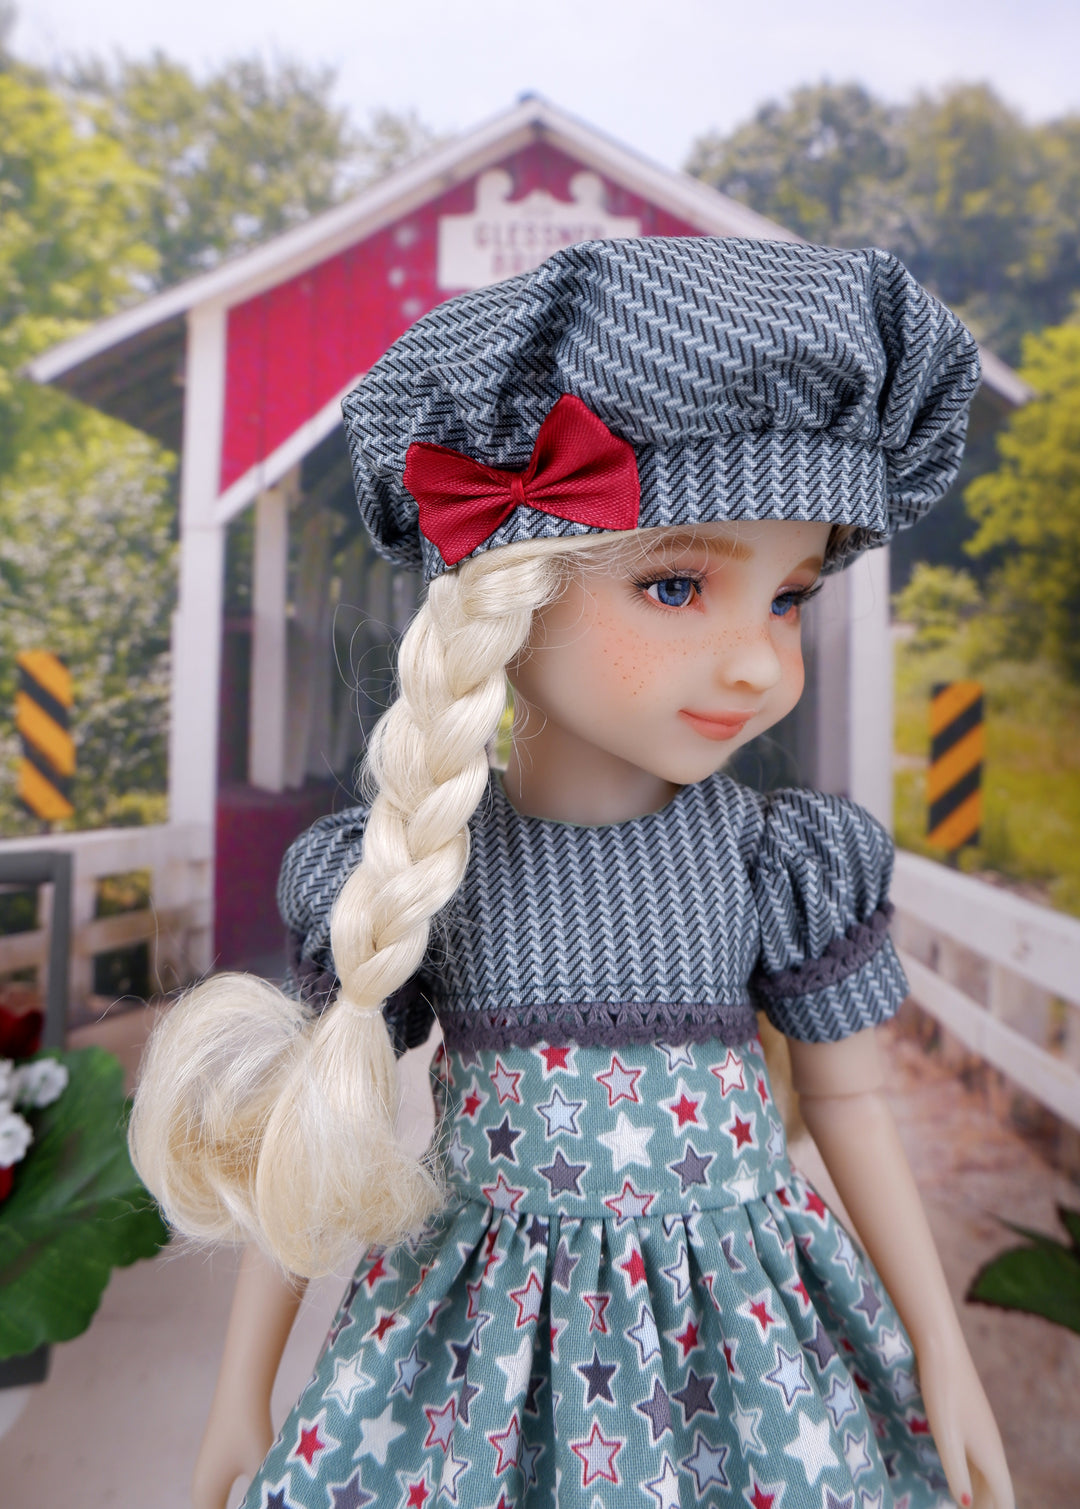 Stars Above - dress and shoes for Ruby Red Fashion Friends doll